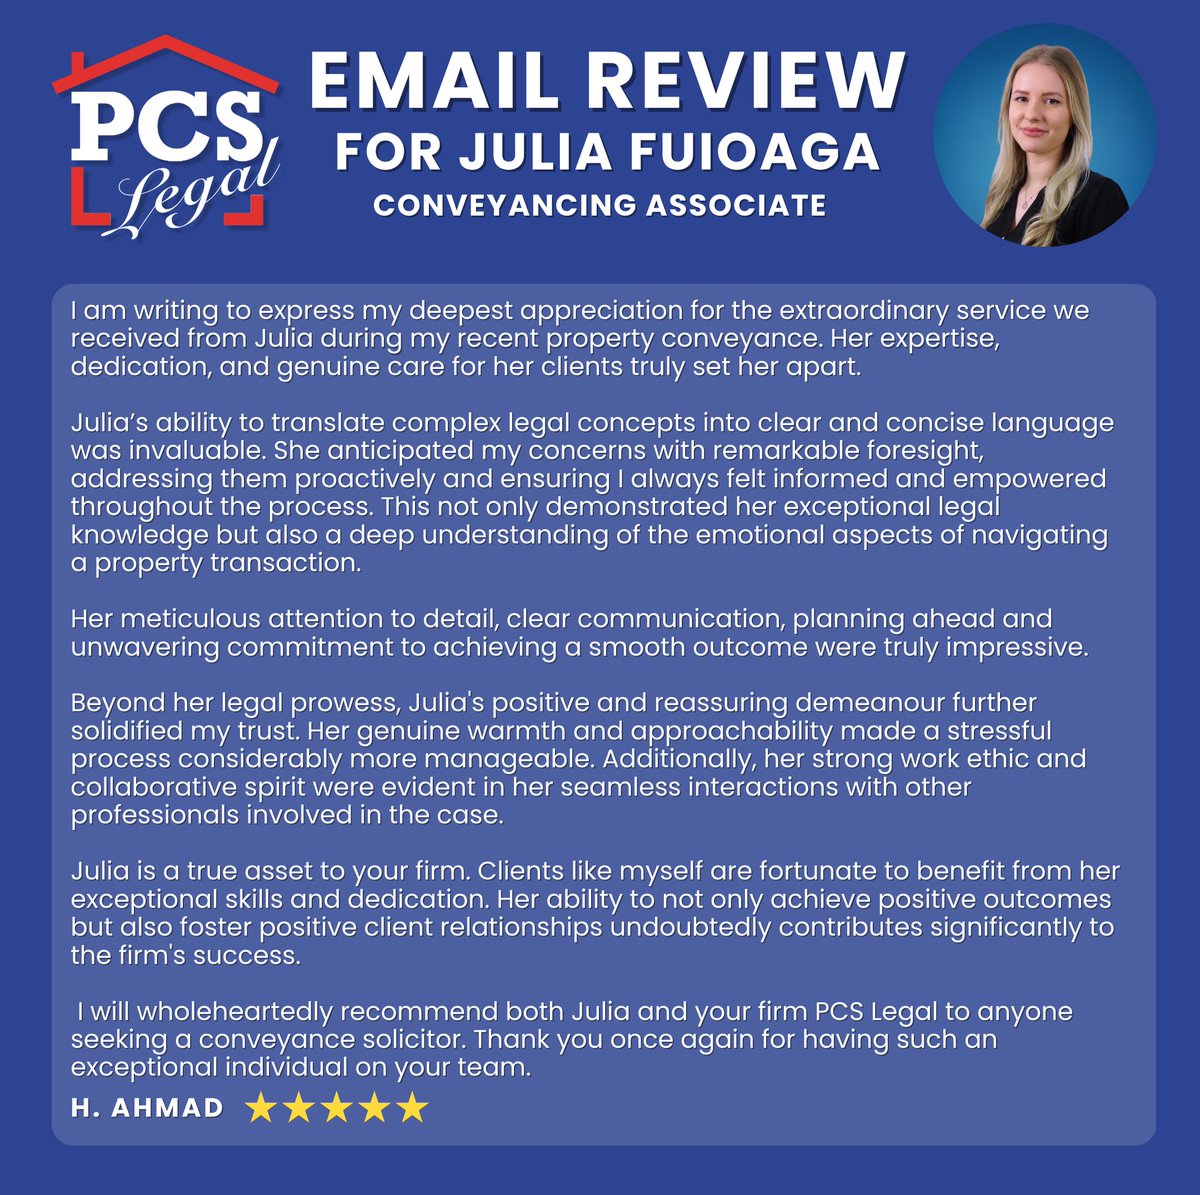 This client made the effort to write a glowing review and email it to our senior directors, in praise of our fantastic Conveyancing Associate Julia! 🌟 #TeamPCS #PCSLegal #Review